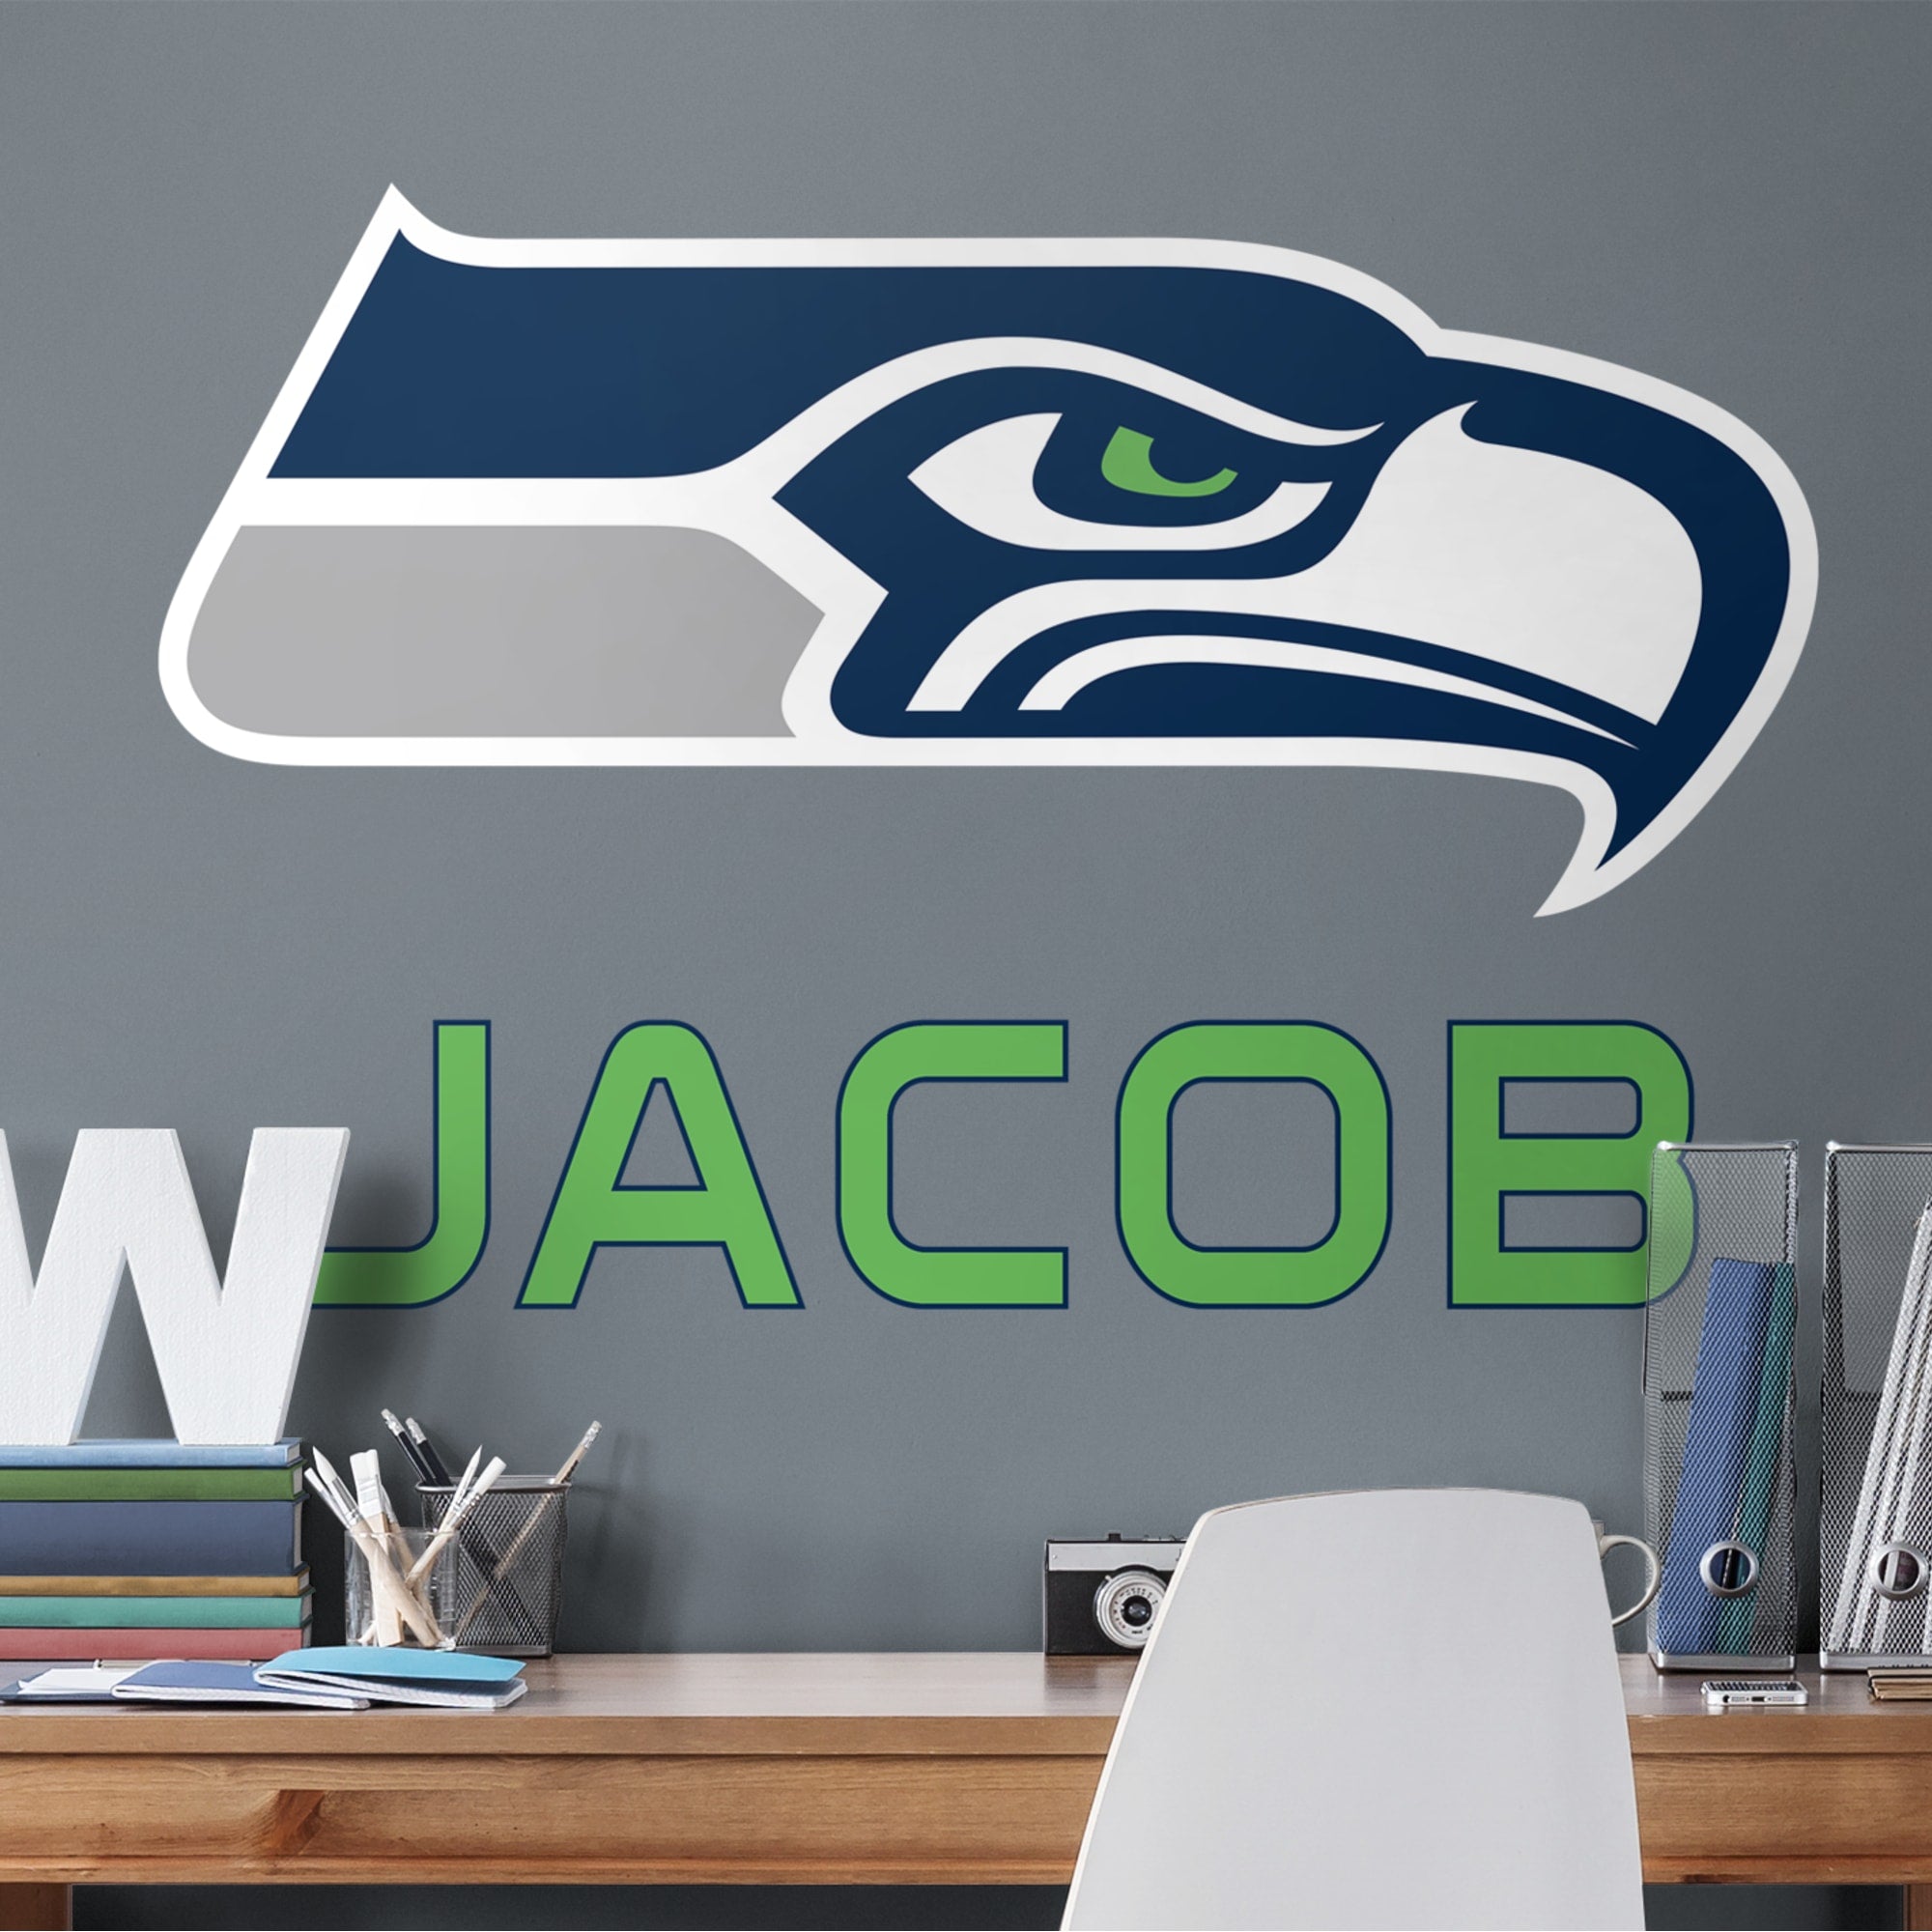 Seattle Seahawks: Stacked Personalized Name - Officially Licensed NFL Transfer Decal in Green (52"W x 39.5"H) by Fathead | Vinyl